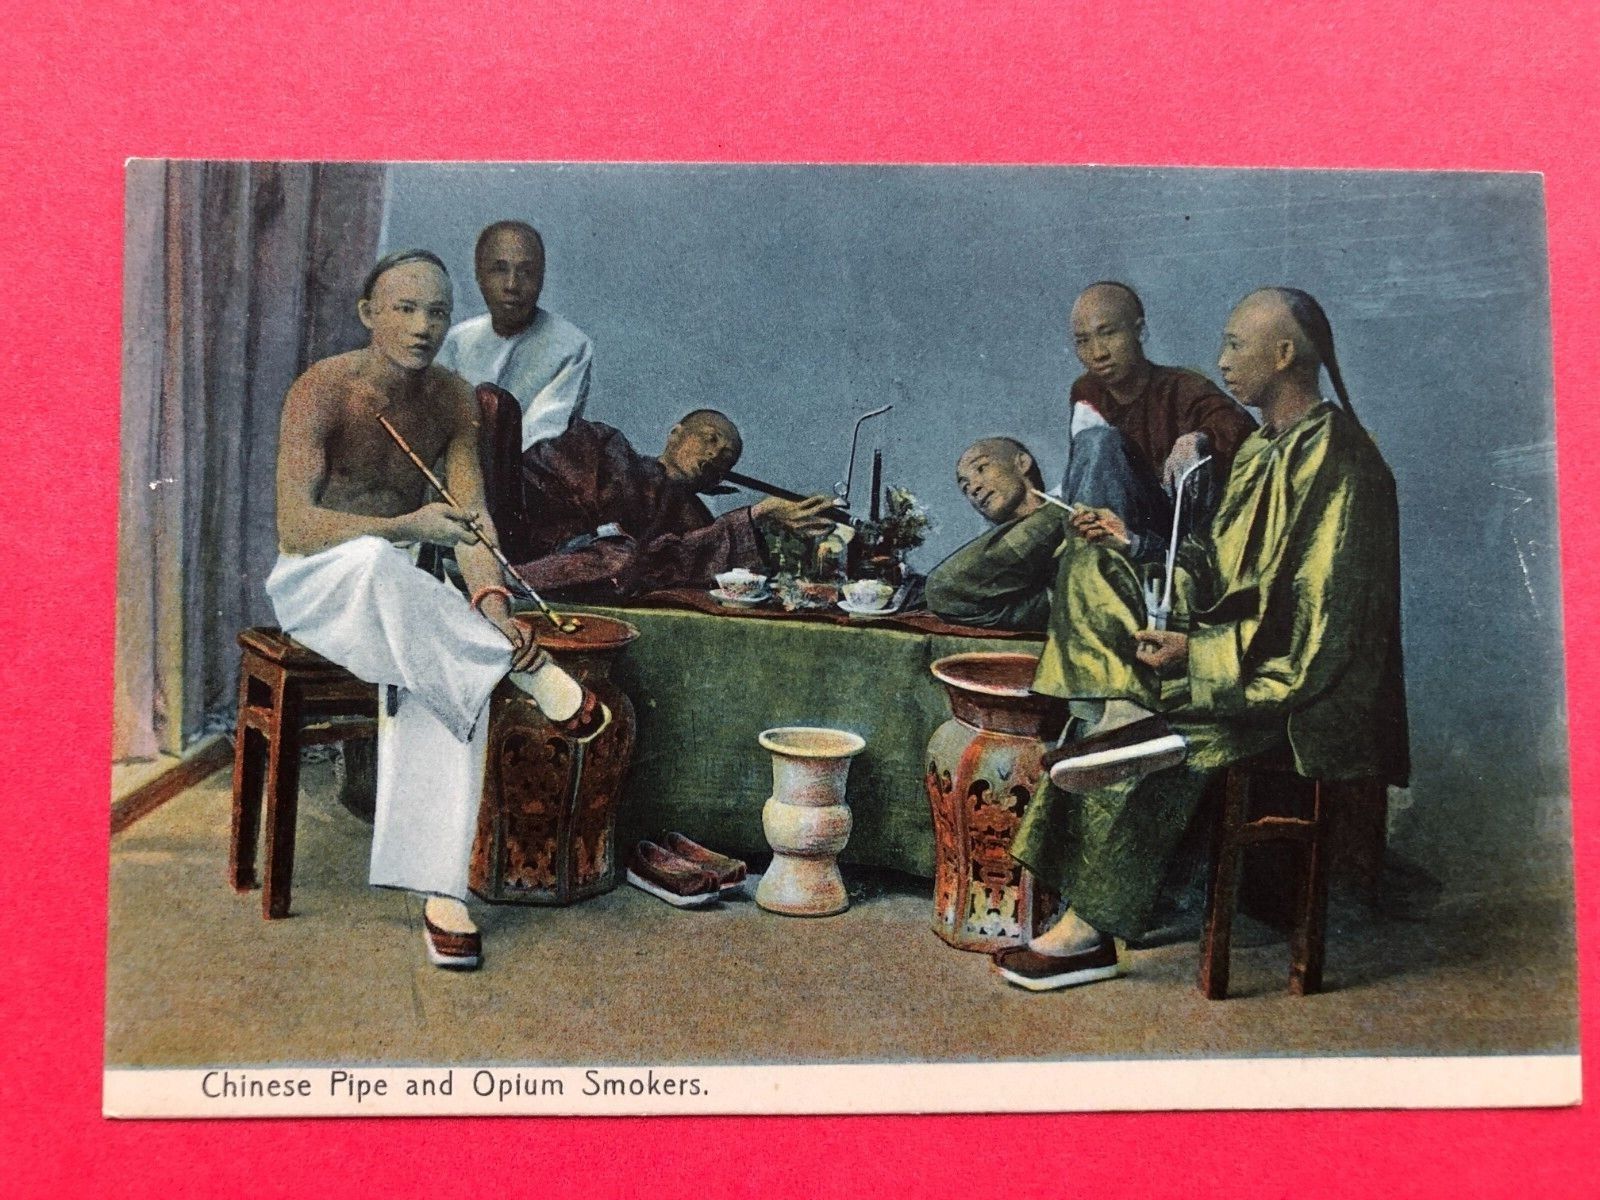 Old China Postcard - Chinese Pipe and Opium Smokers